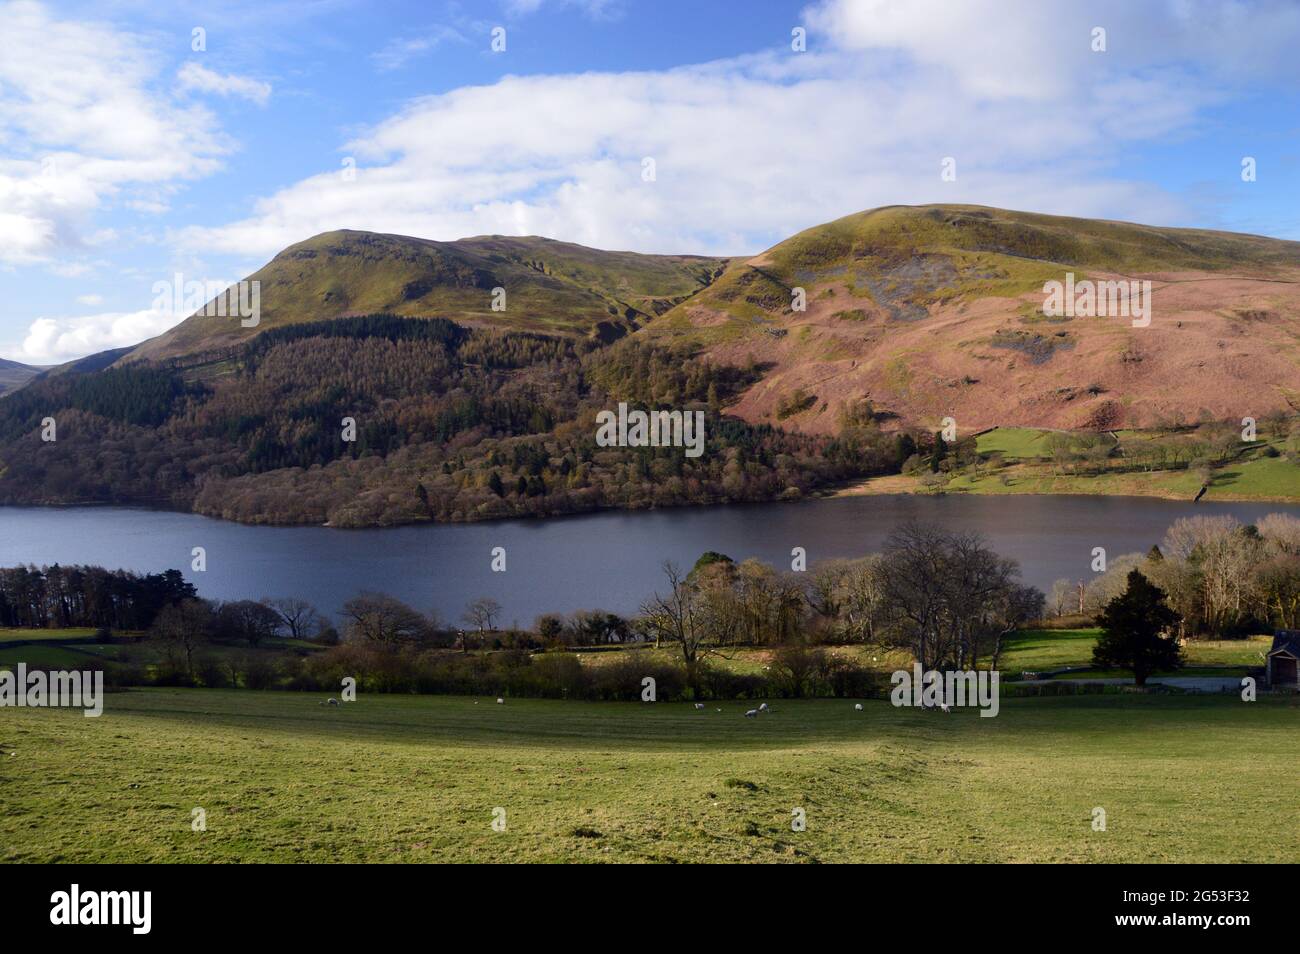 Carling Knott and the Wainwright Burnbank Fell above Loweswater Lake in the Lake District National Park, Cumbria, England, UK Stock Photo